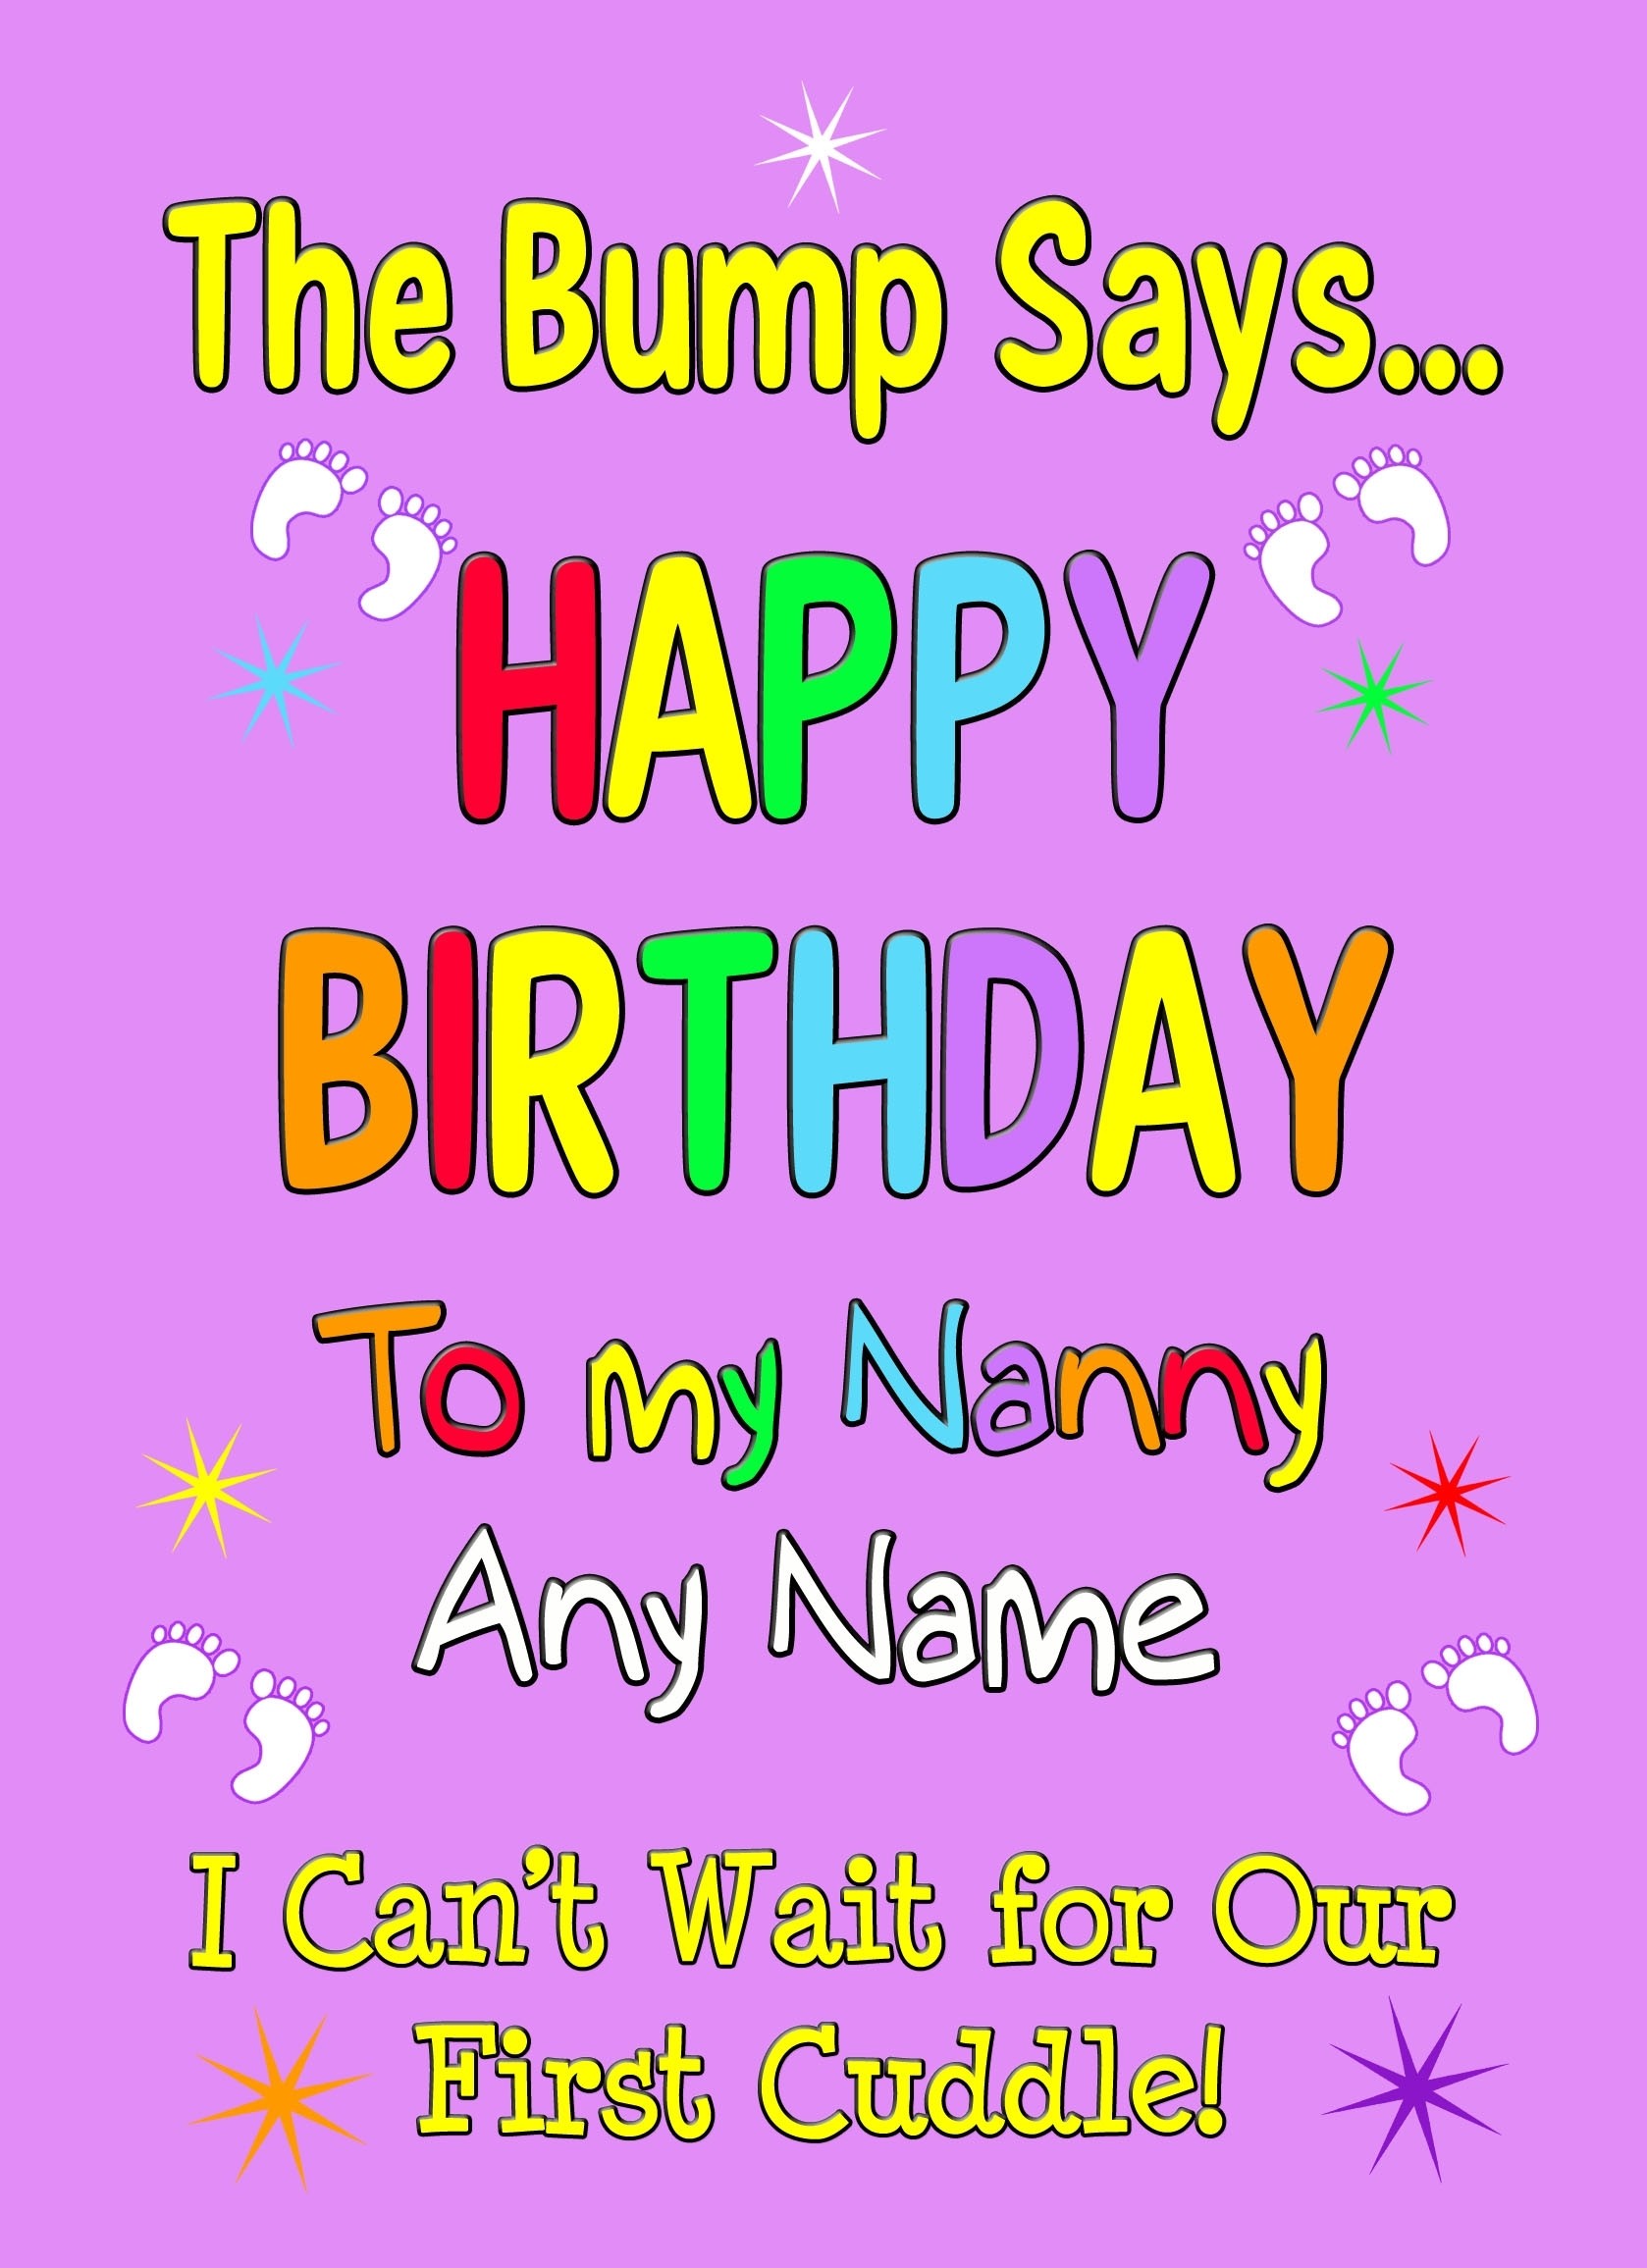 Personalised From The Bump Pregnancy Birthday Card (Nanny, Purple)